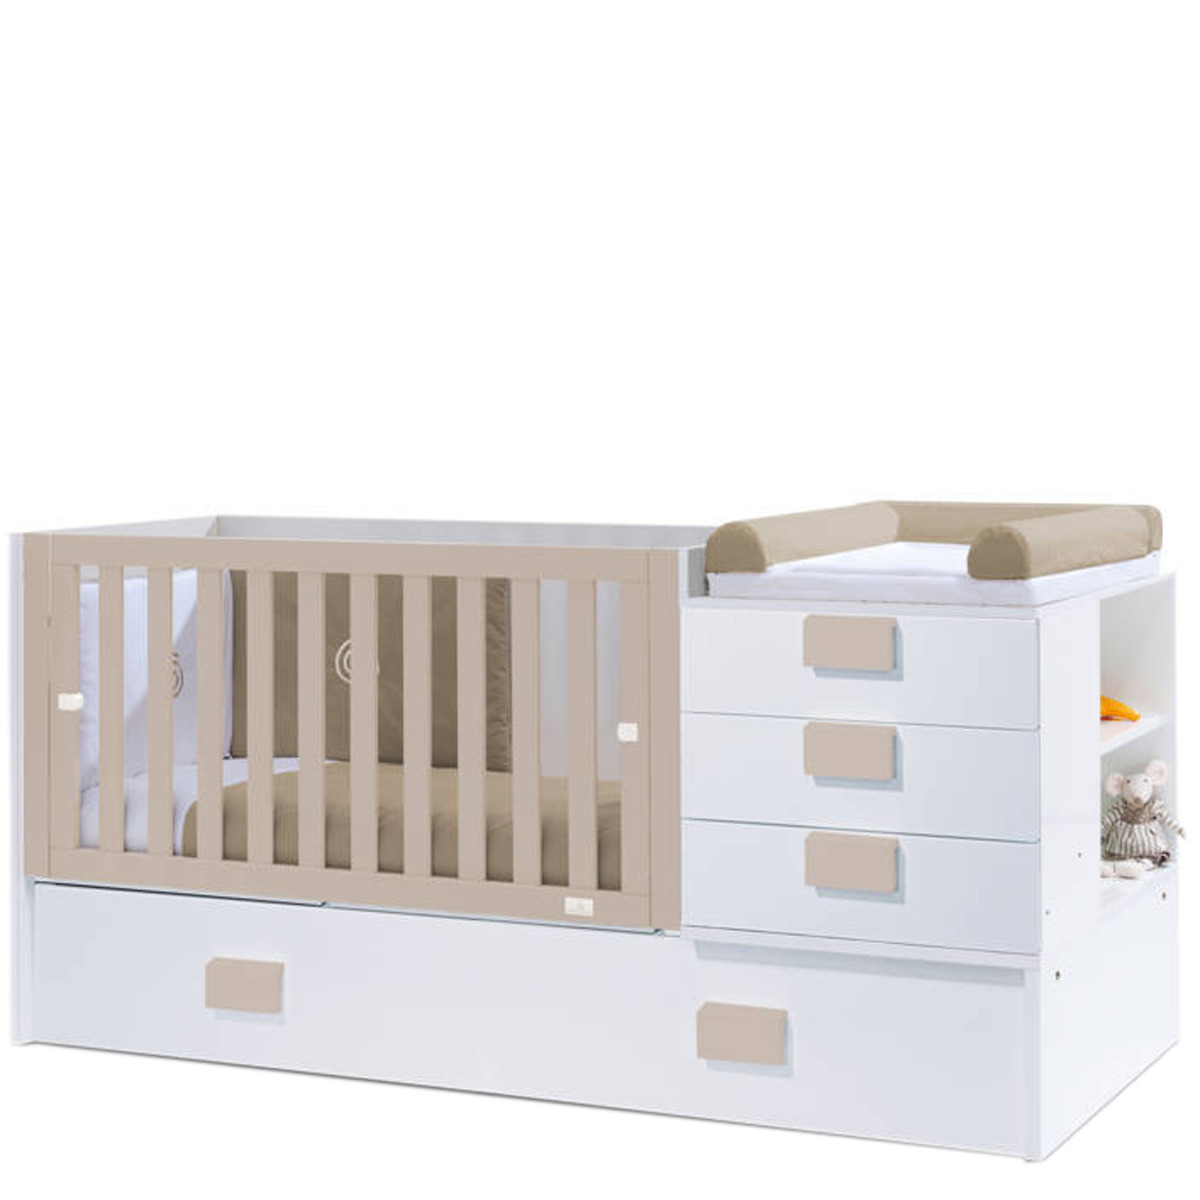 Convertible cribs are the new trend in nurseries.